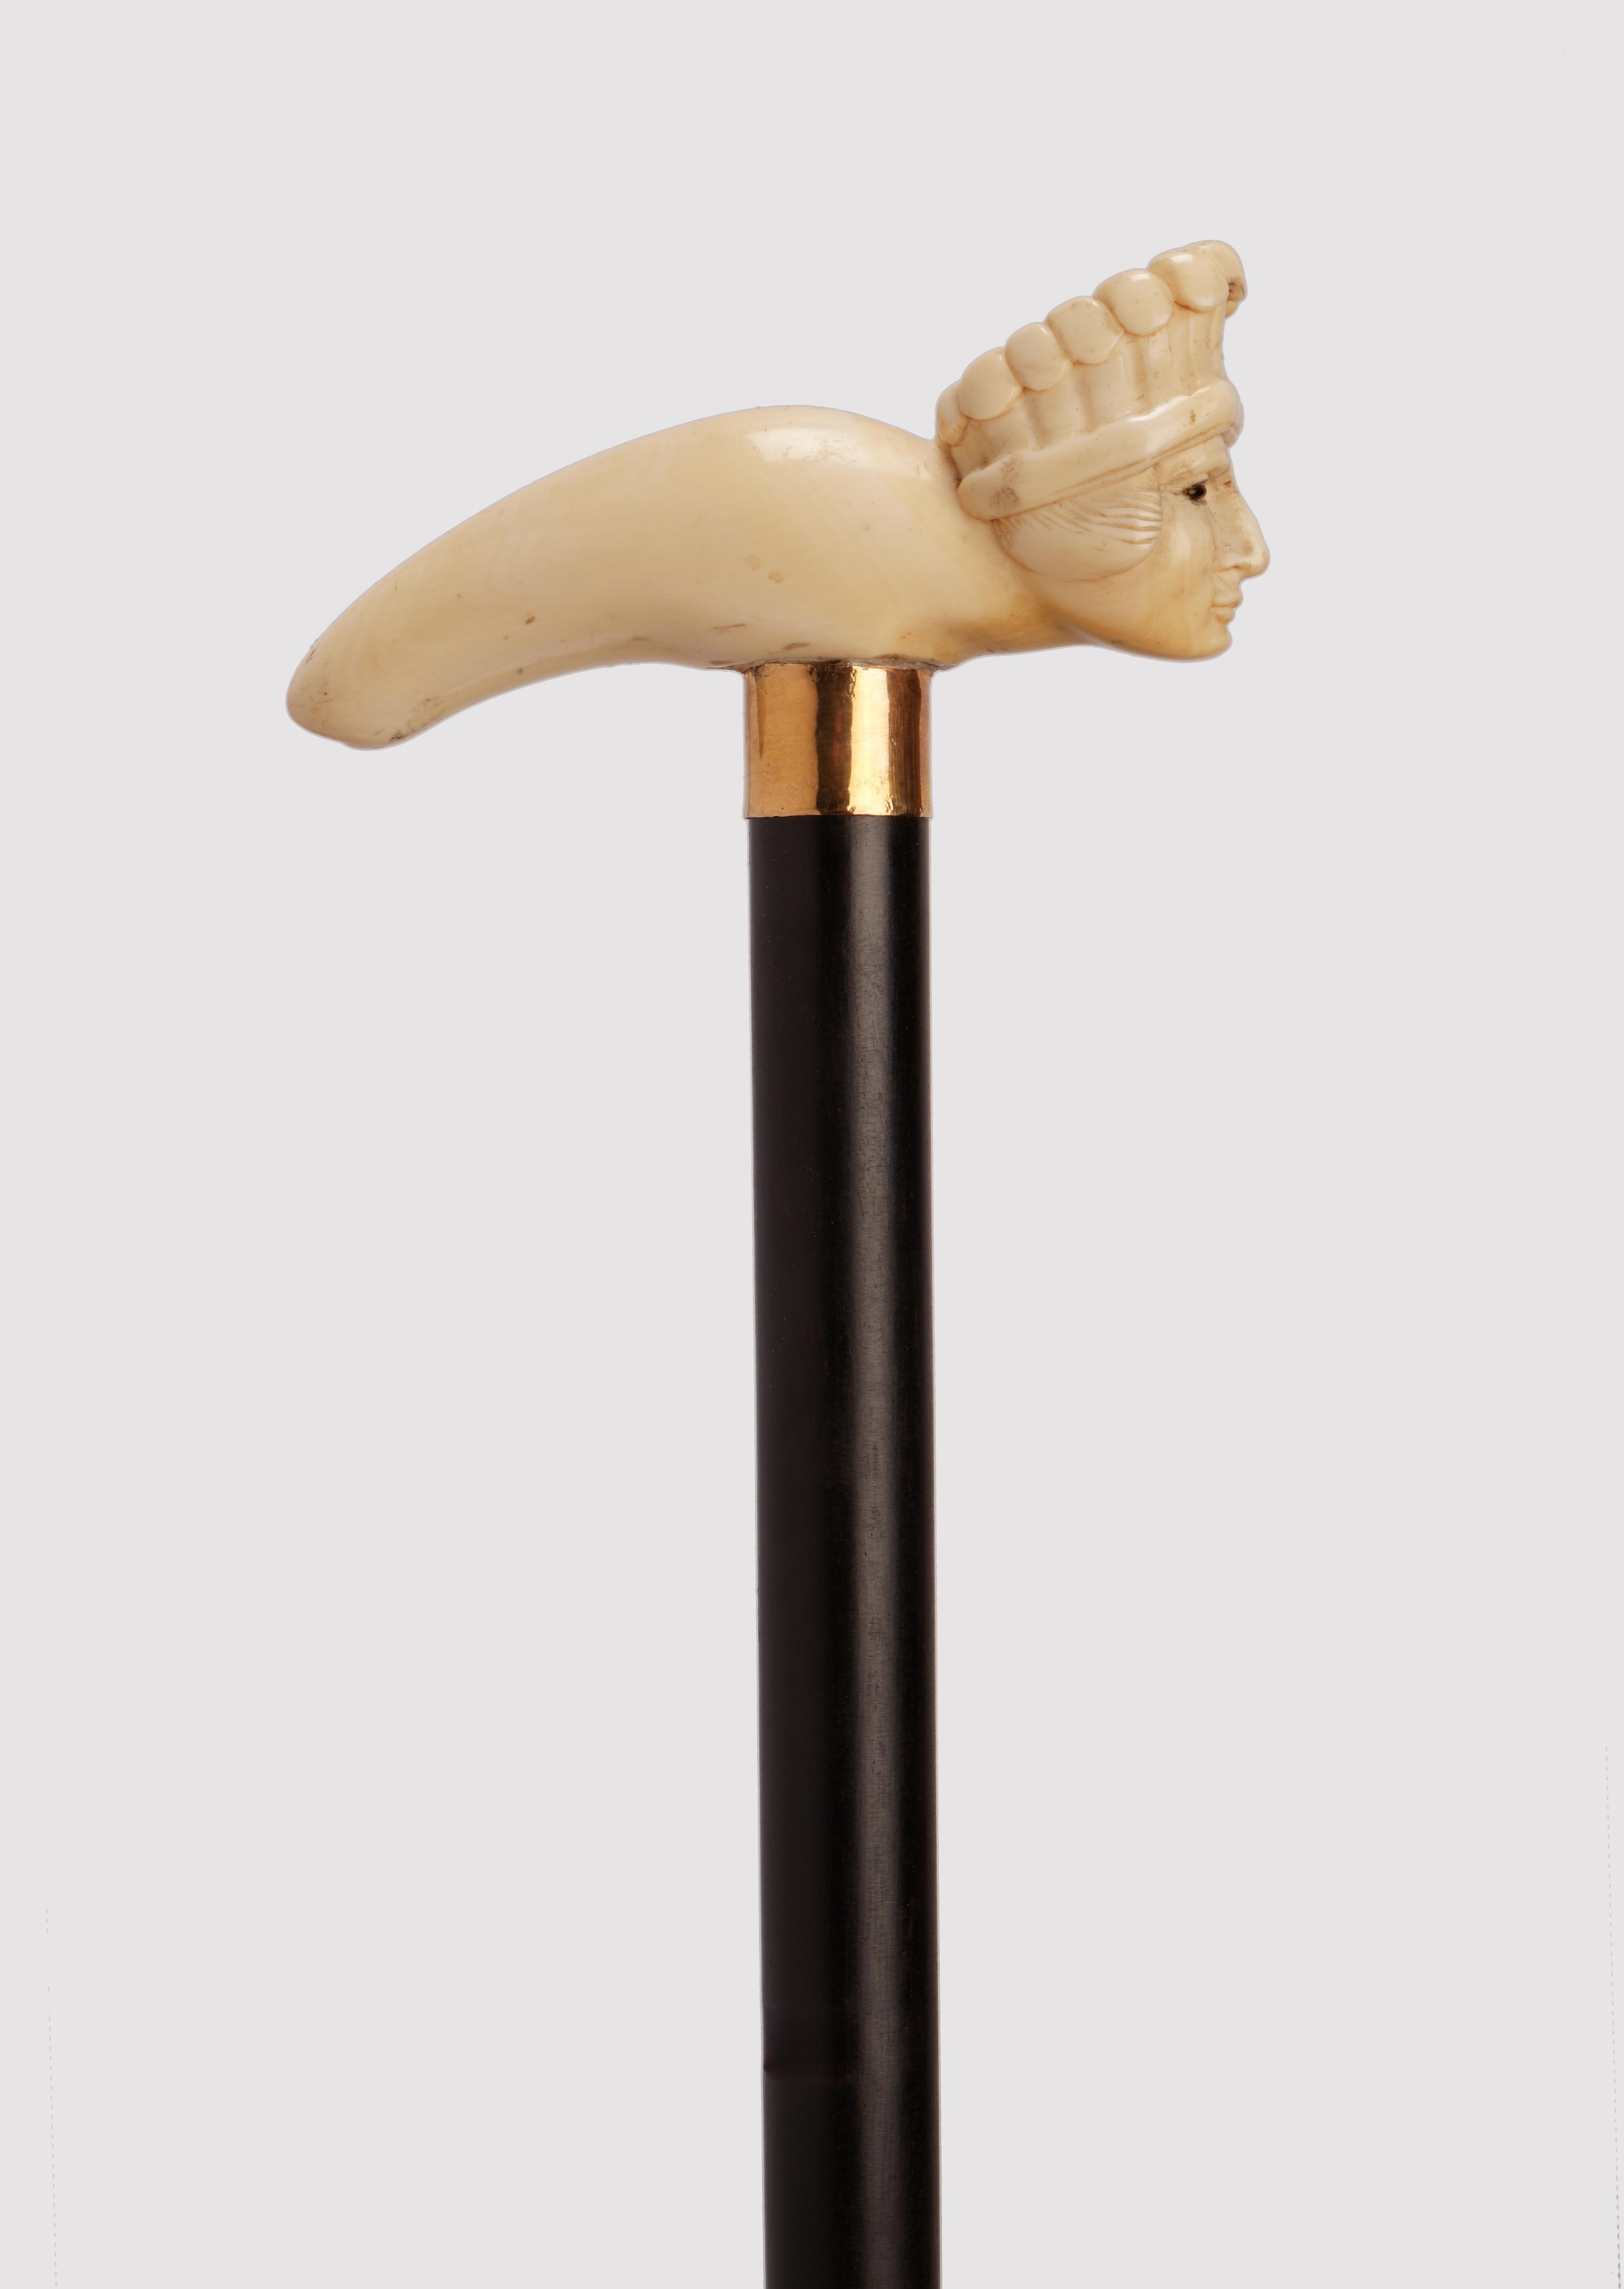 Walking stick:  ivory carved handle. The handle is a bequille shaped, plane in its surface, with the head of a central Native american chief. Sulphur glass eyes. Ebony wood shaft. Silver gilt ring. Ivory ferrule. England circa 1880.
(SHIP TO EU